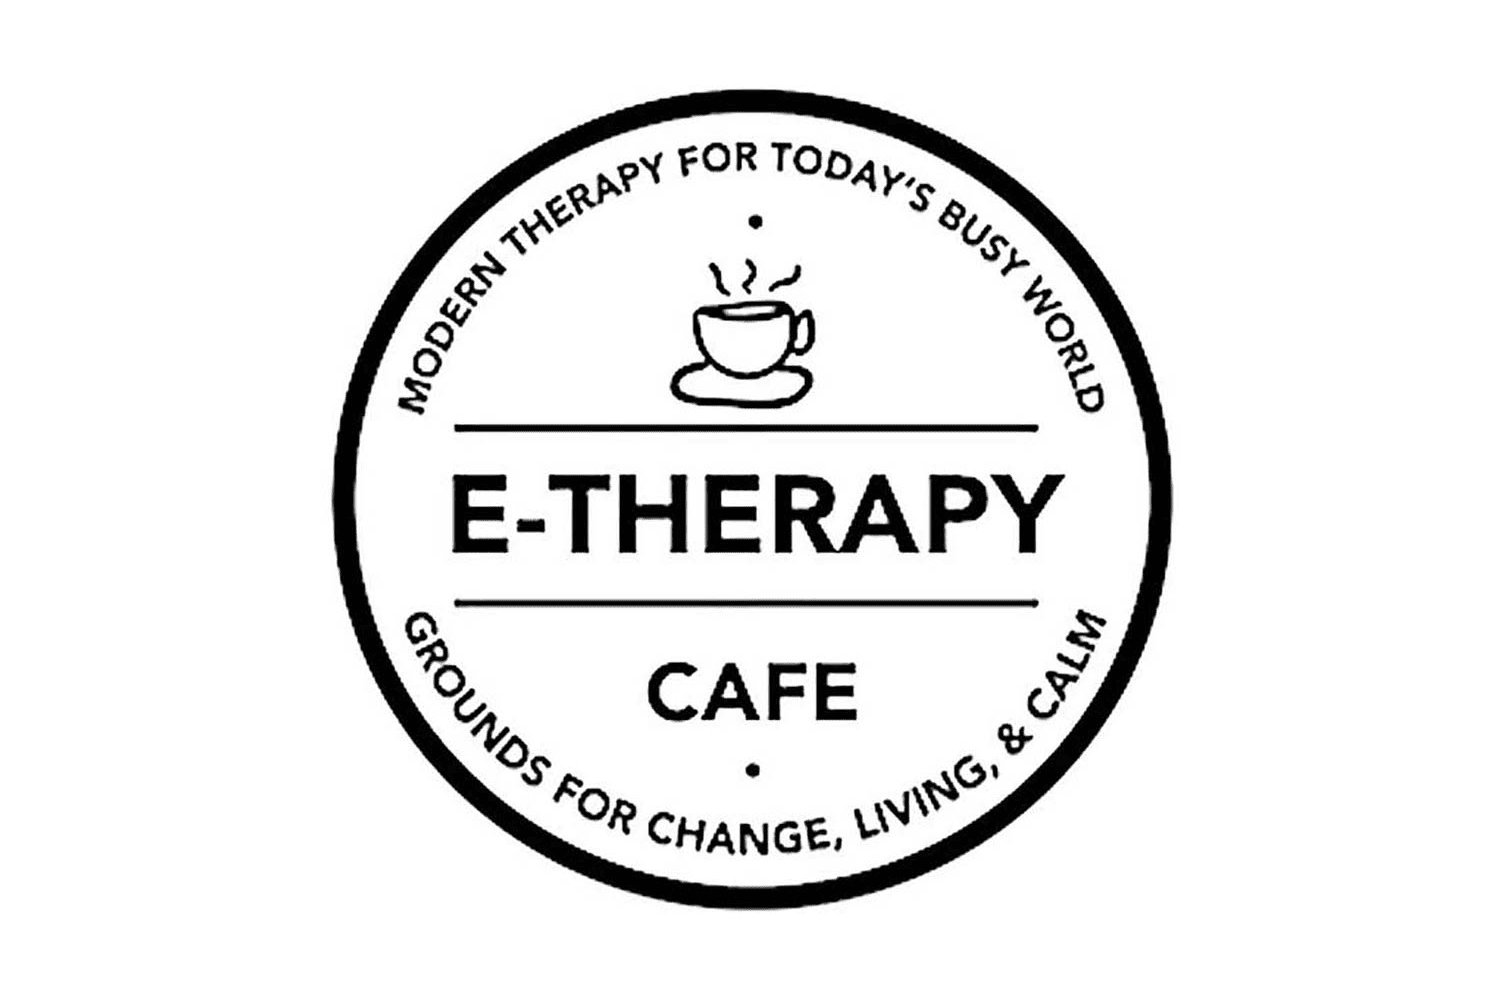 E therapy cafe